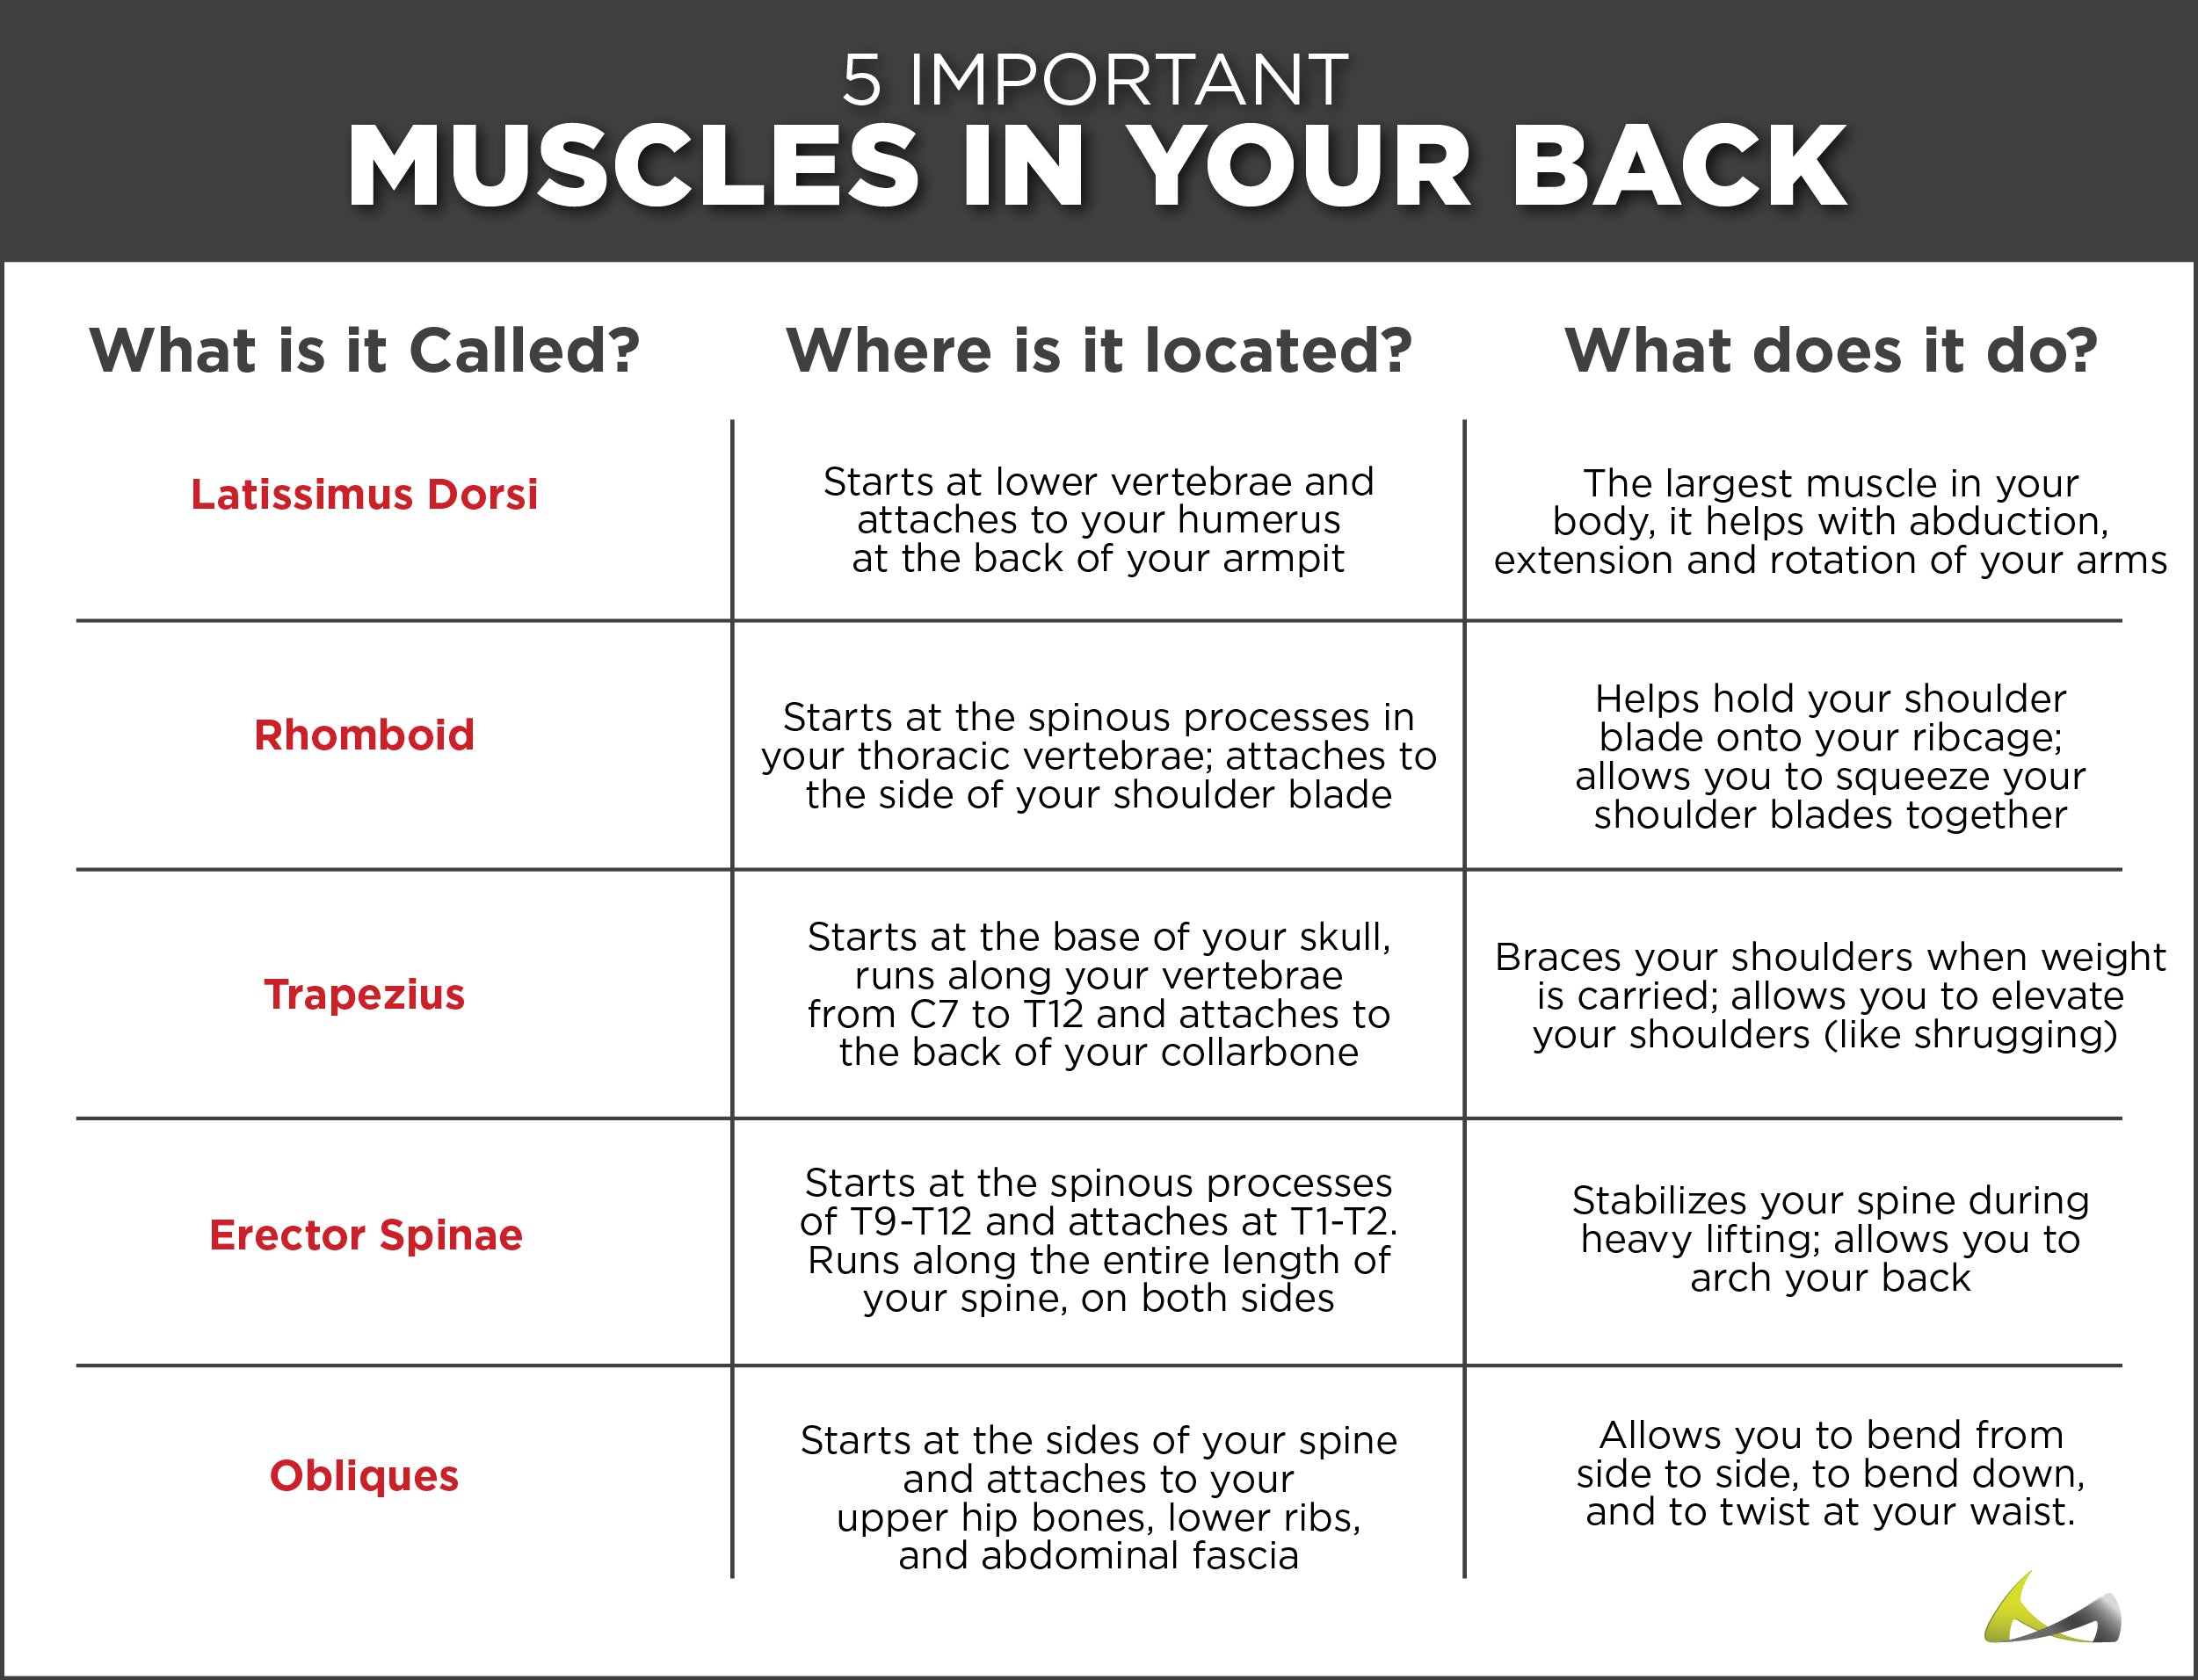 list of the muscles in your back, where they originate and what they do